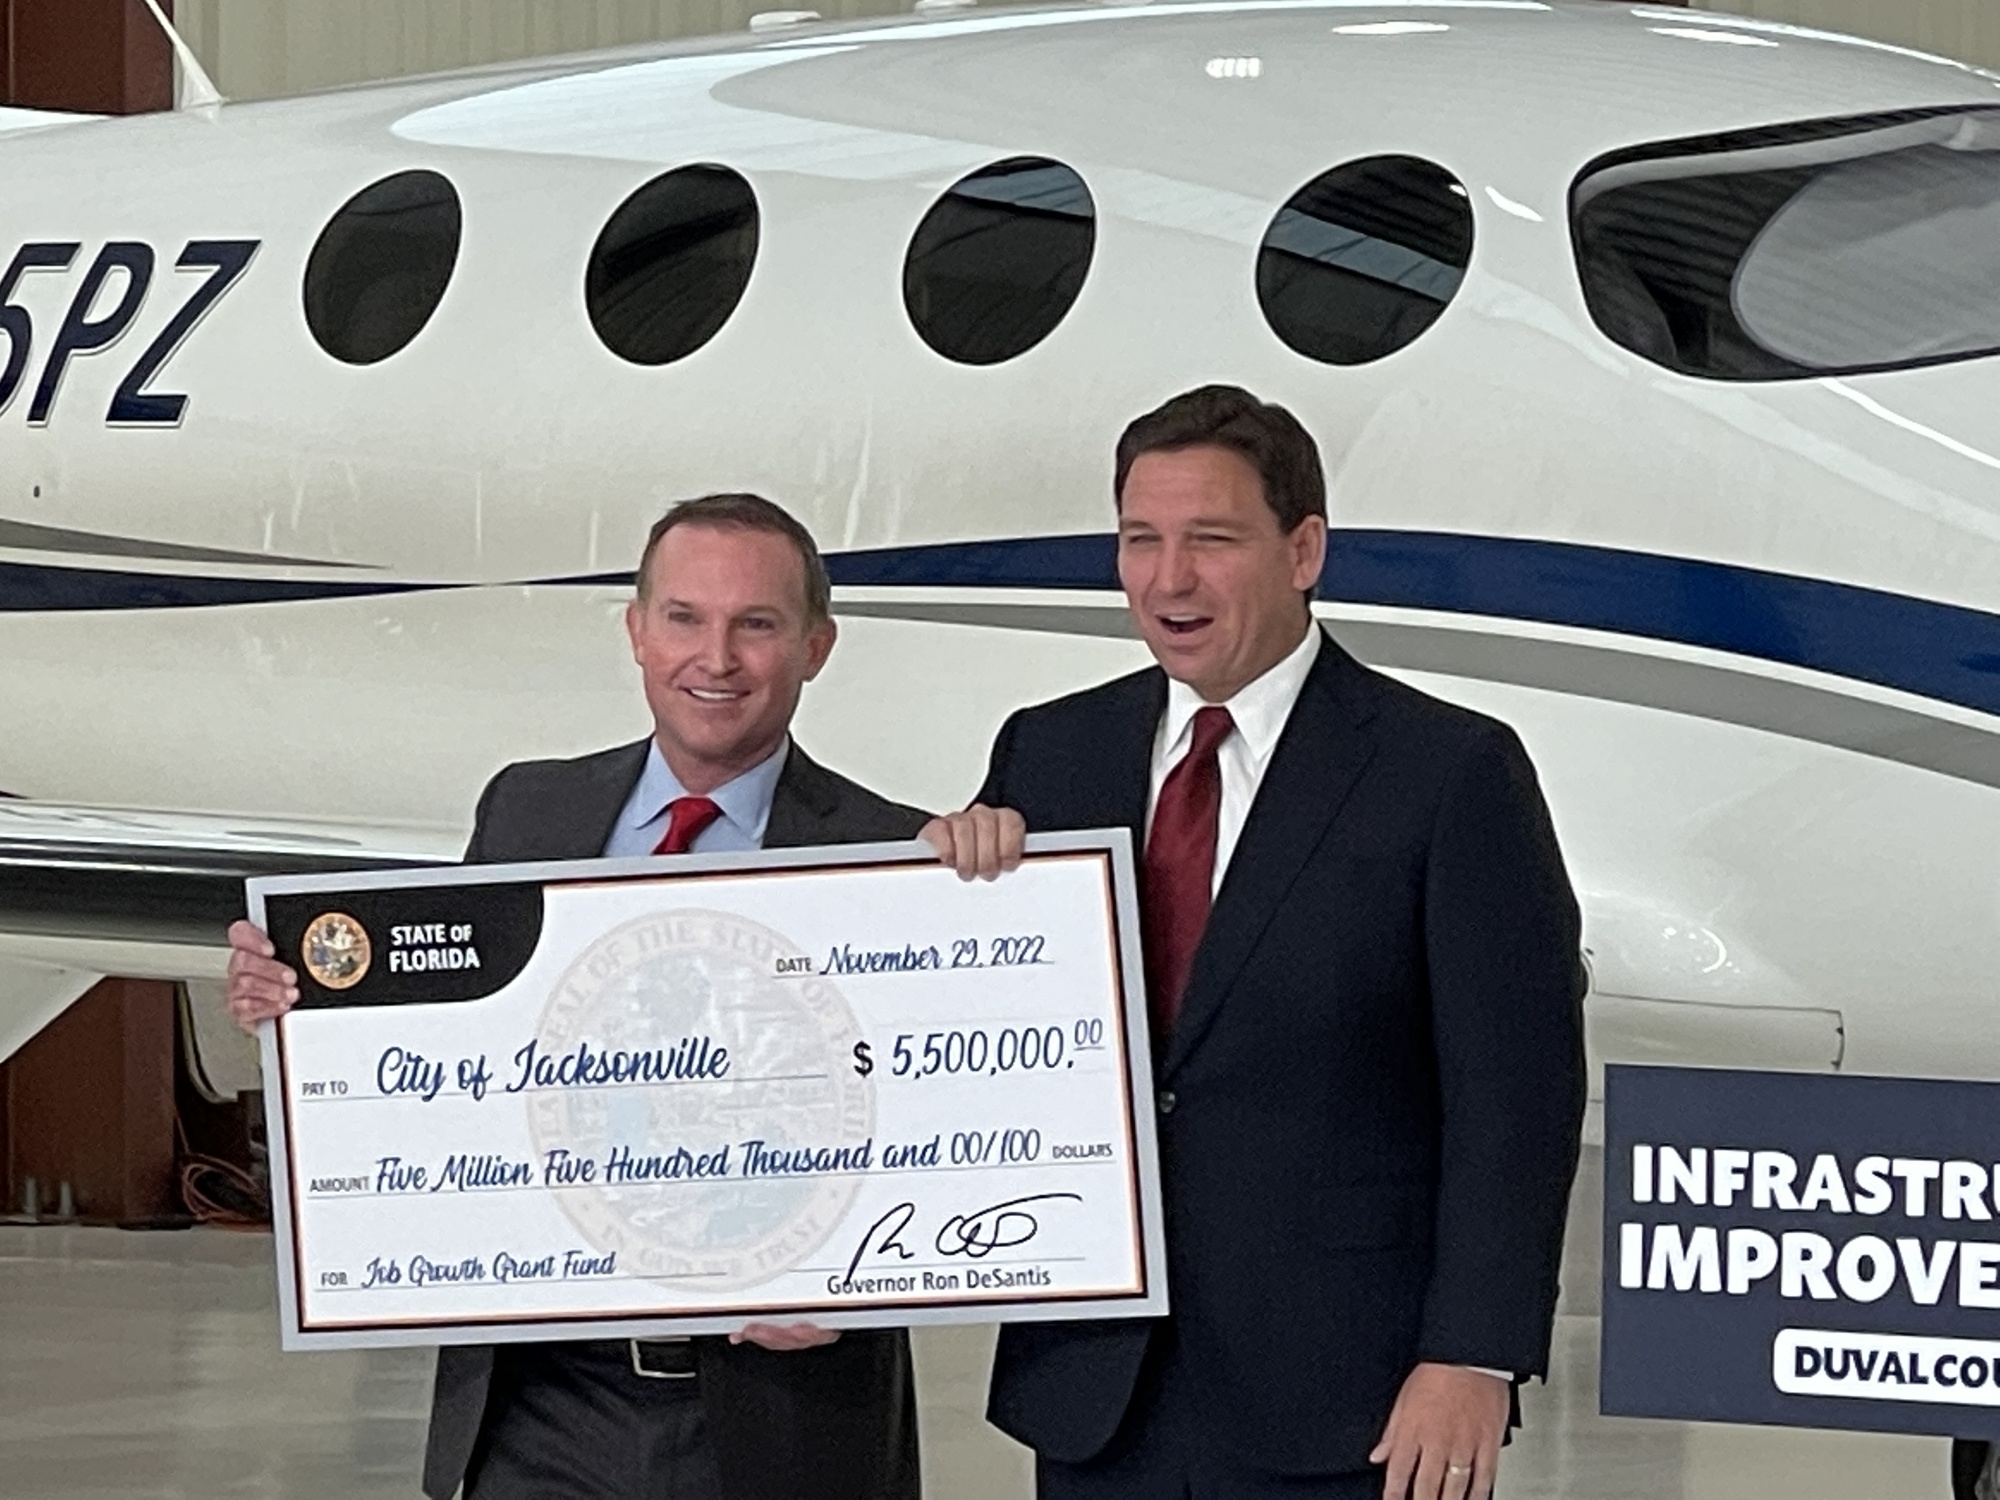 Jacksonville Mayor Lenny Curry and Florida Gov. Ron DeSantis and show off the $5.5 million check at the news conference